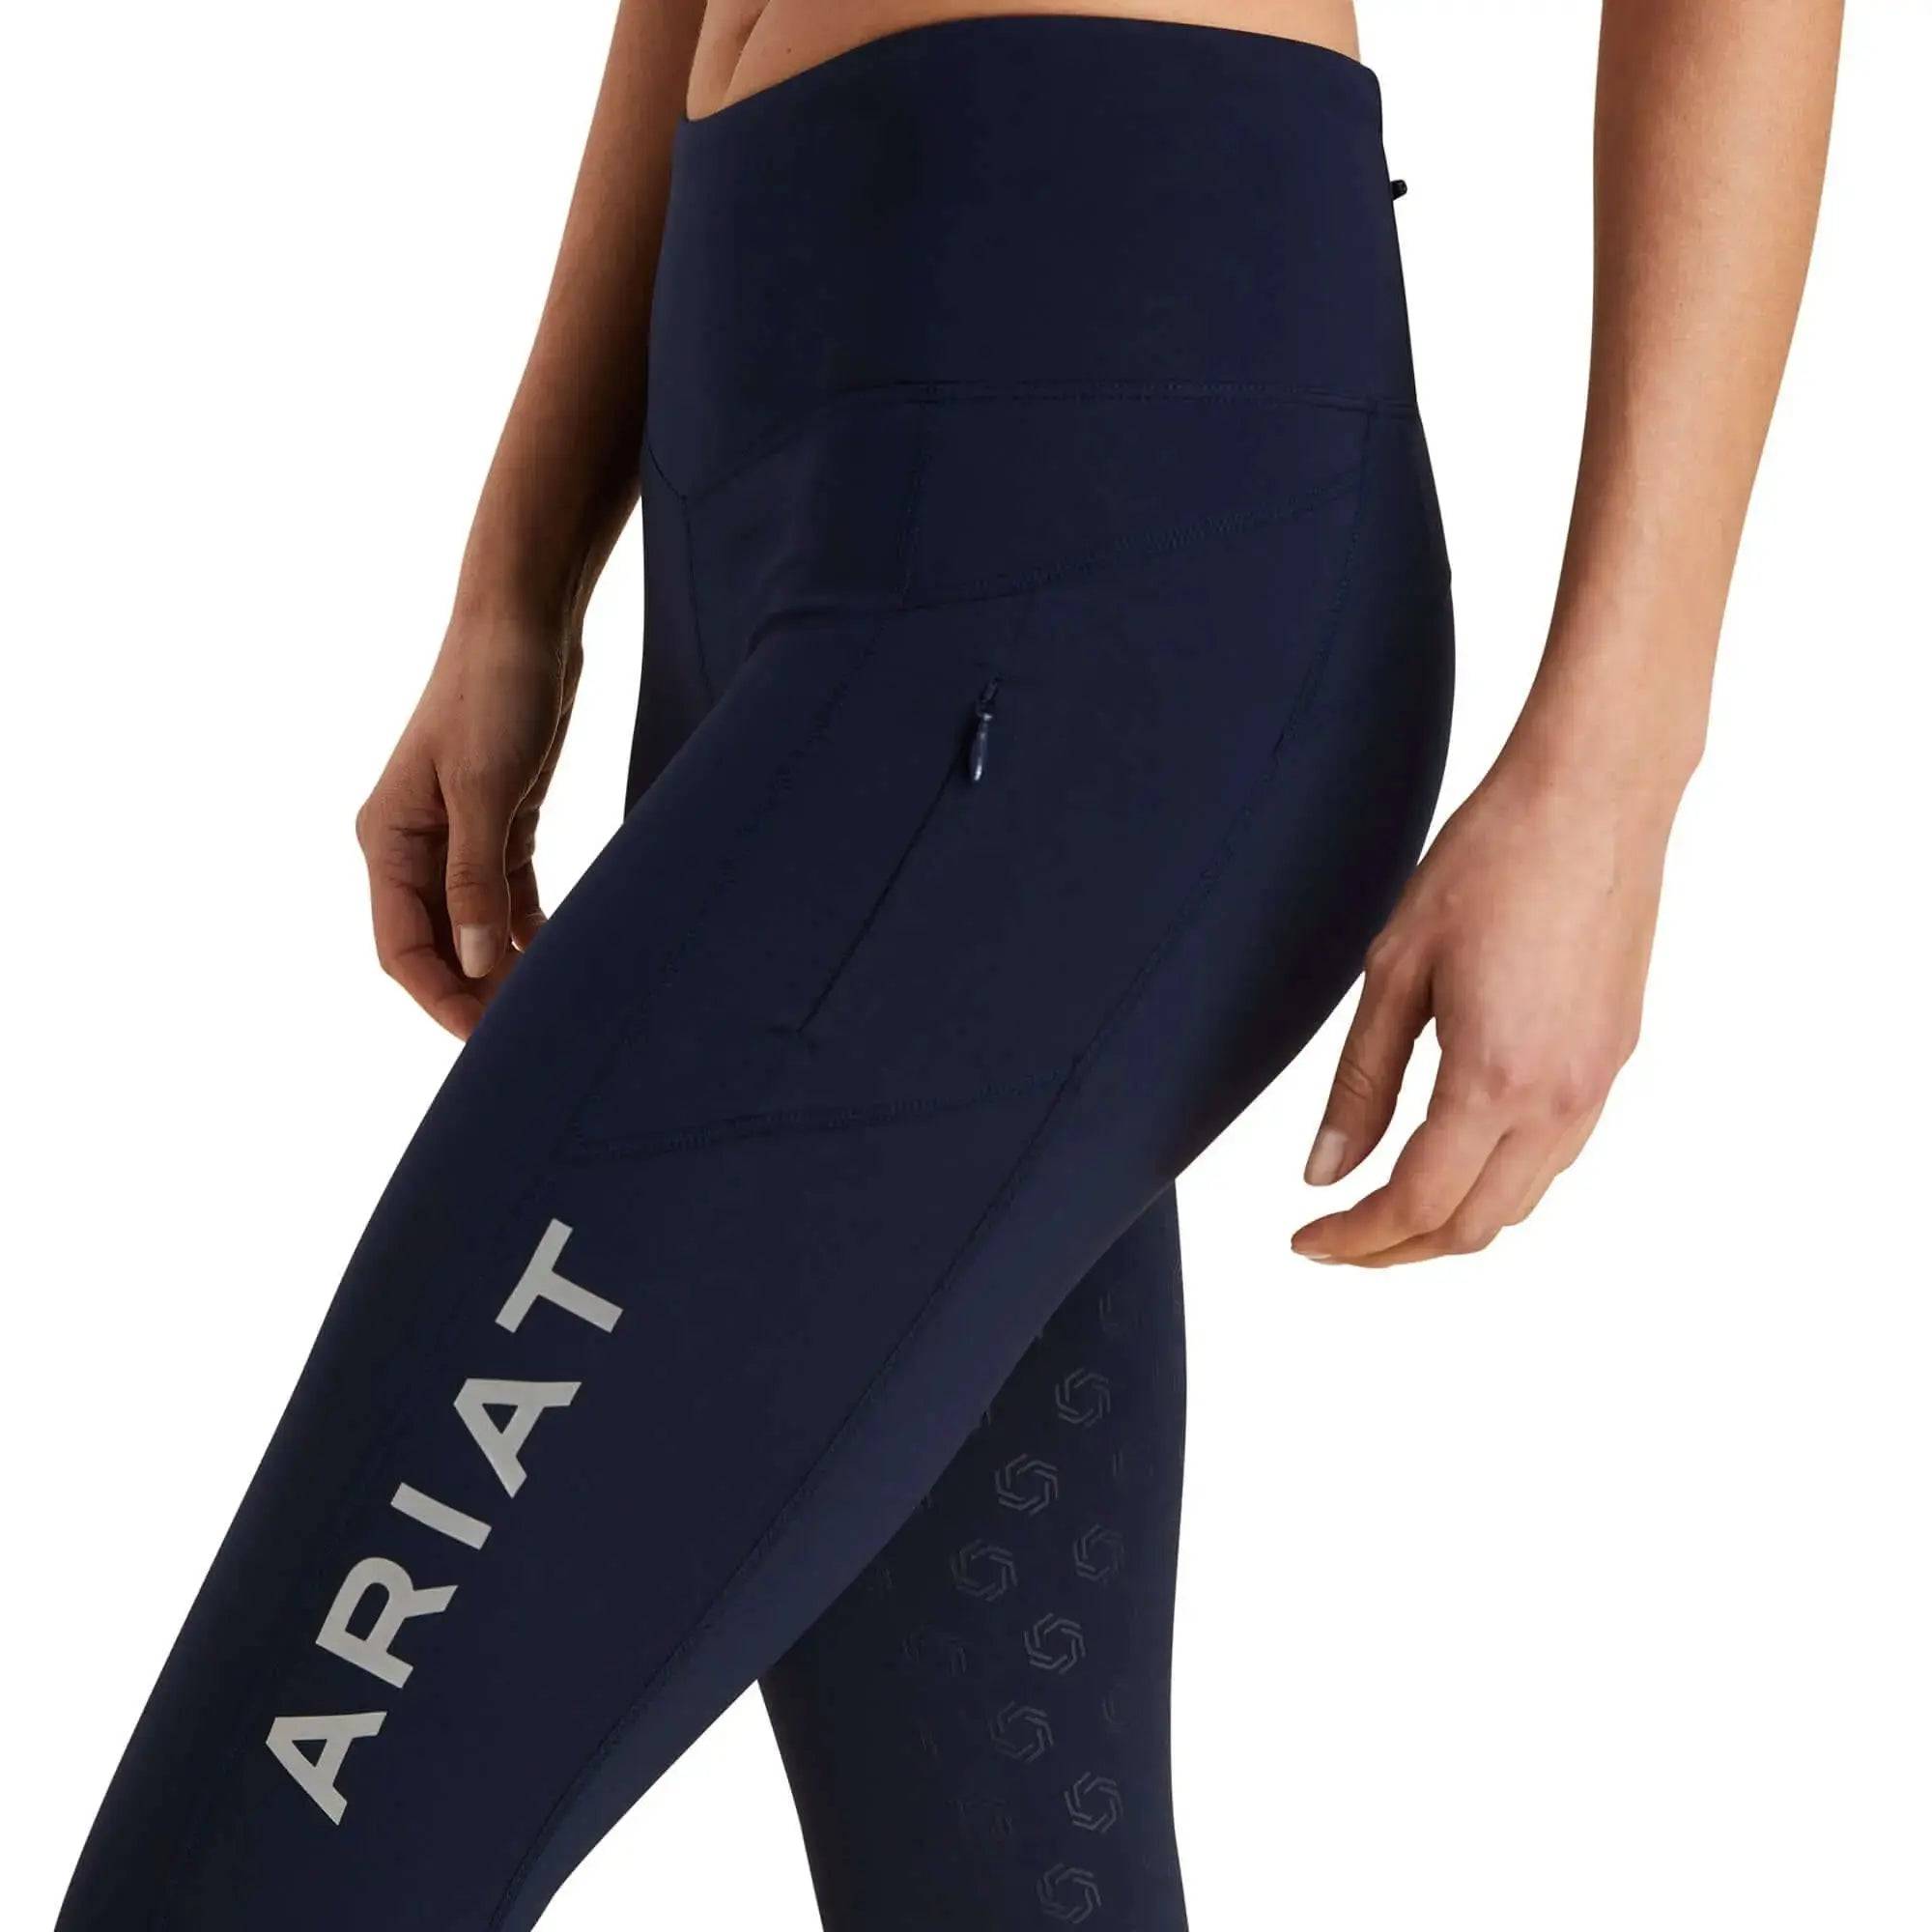 ARIAT LADIES ATTAIN THERMAL FULL SEAT RIDING TIGHTS - WOMEN, Equestrian, Pet, Country Store